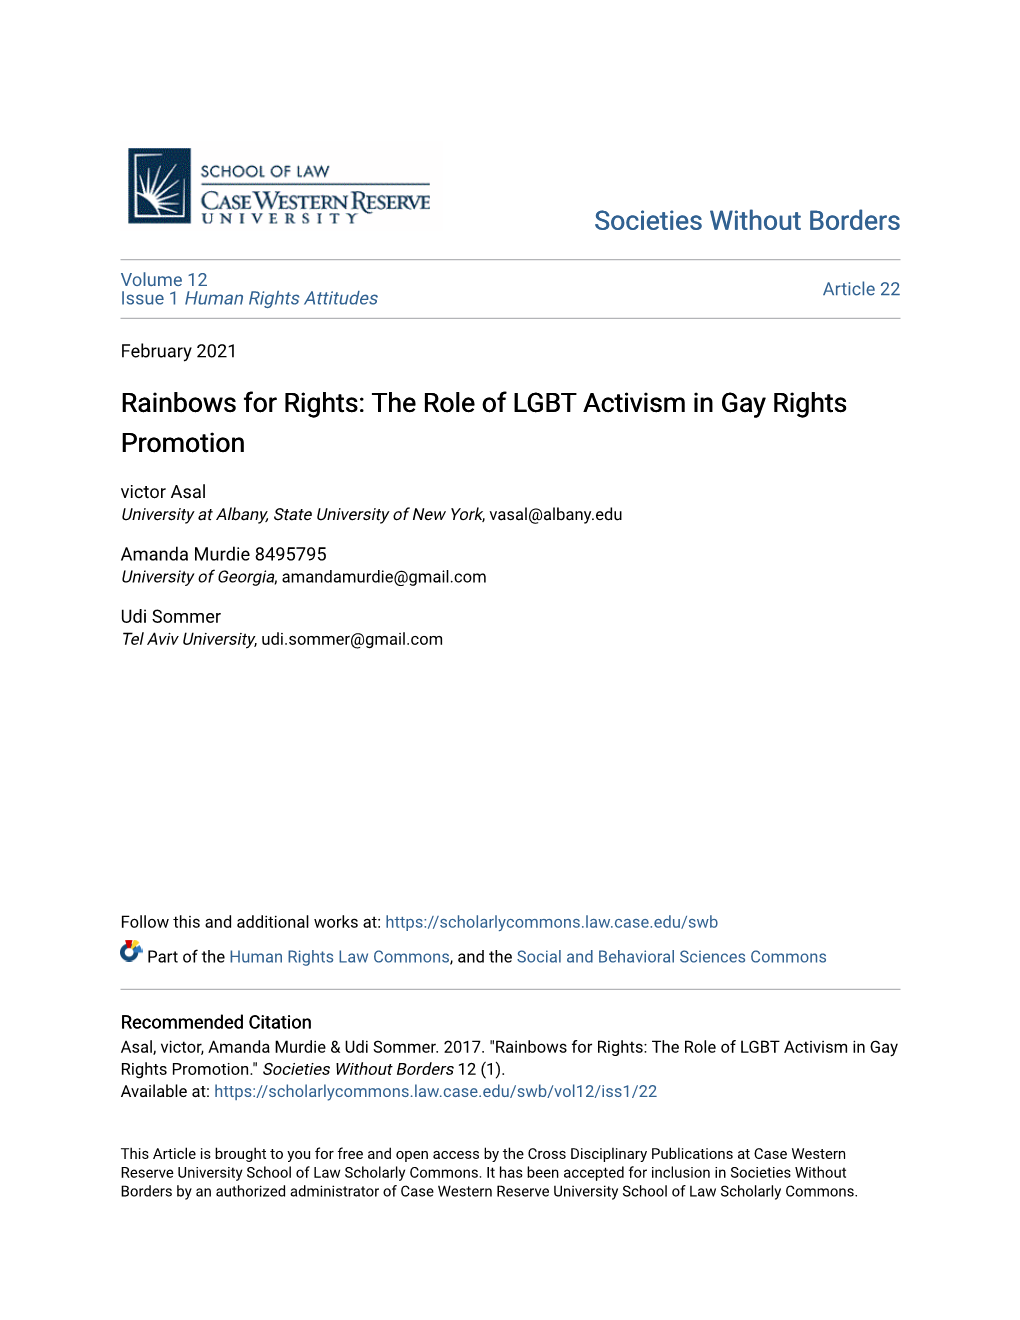 The Role of LGBT Activism in Gay Rights Promotion Victor Asal University at Albany, State University of New York, Vasal@Albany.Edu